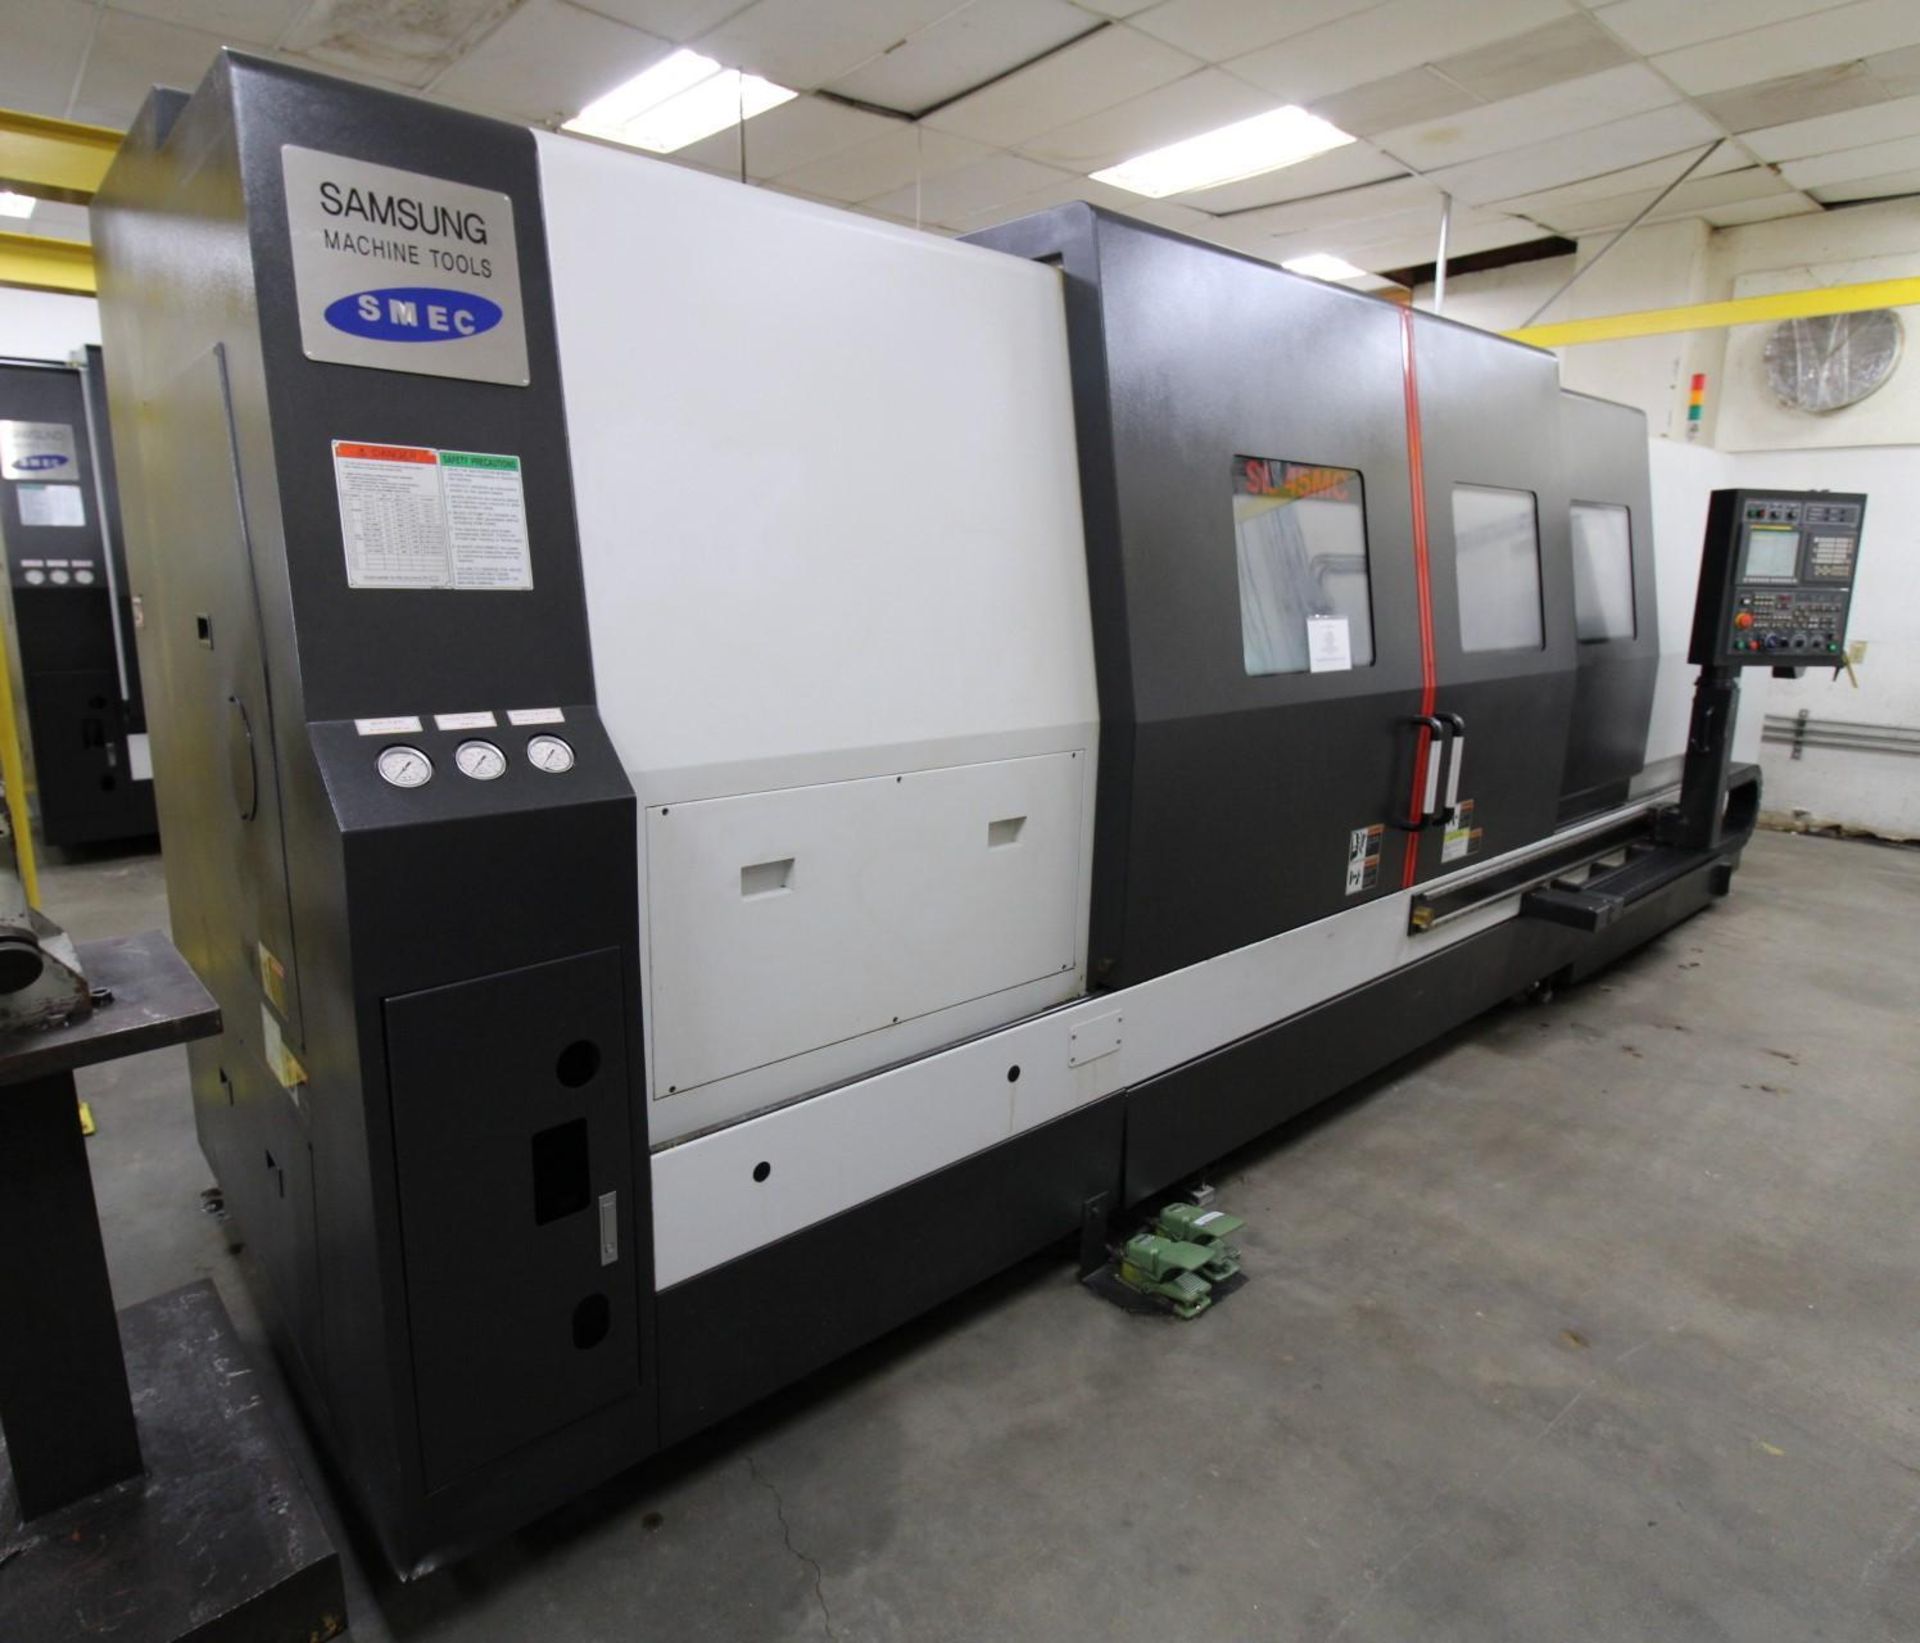 MULTI AXIS CNC MILLING & TURNING CENTER, SAMSUNG MDL. SL-45MC/3000, new 2014, Fanuc Oi-TD control, - Image 16 of 16